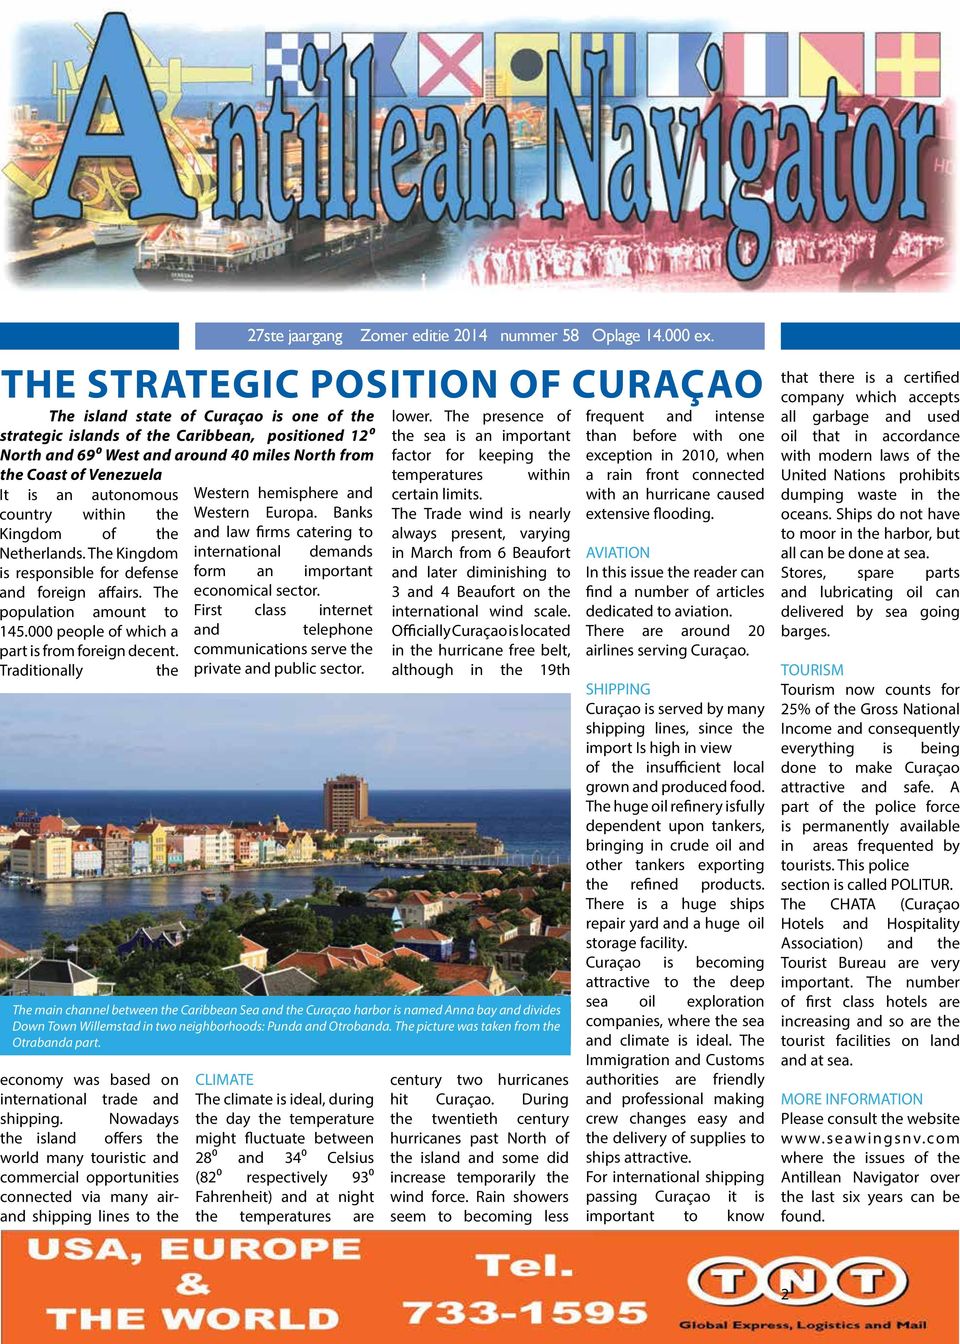 THE STRATEGIC POSITION OF CURAÇAO The island state of Curaçao is one of the strategic islands of the Caribbean, positioned 12⁰ North and 69⁰ West and around 40 miles North from economy was based on